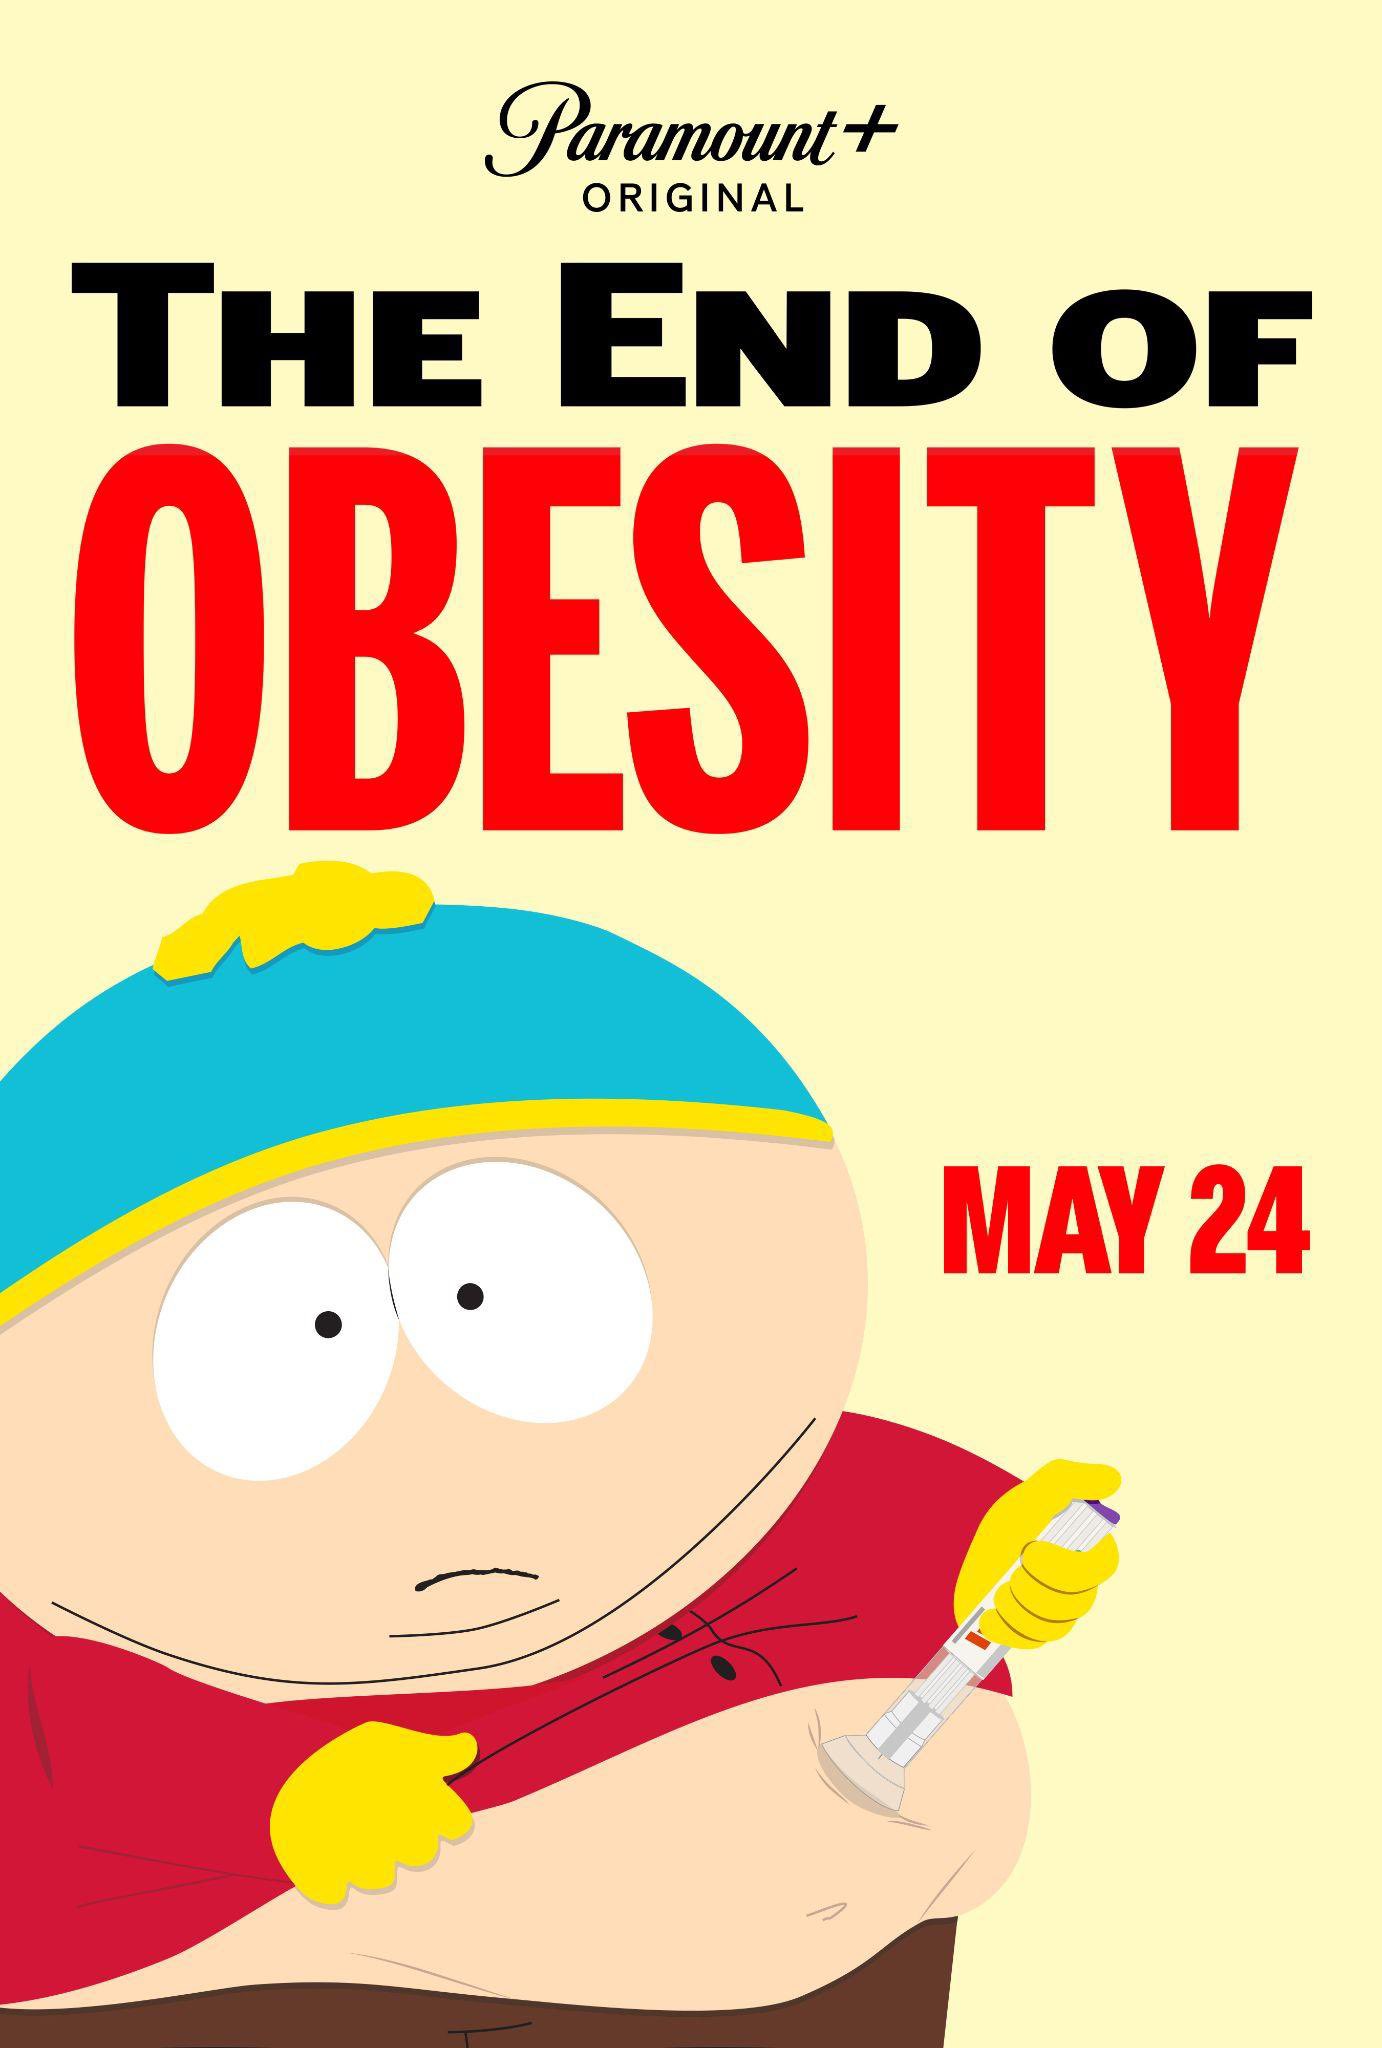 Paramount+ Announces the Next "South Park" Exclusive Event to Premiere May 24